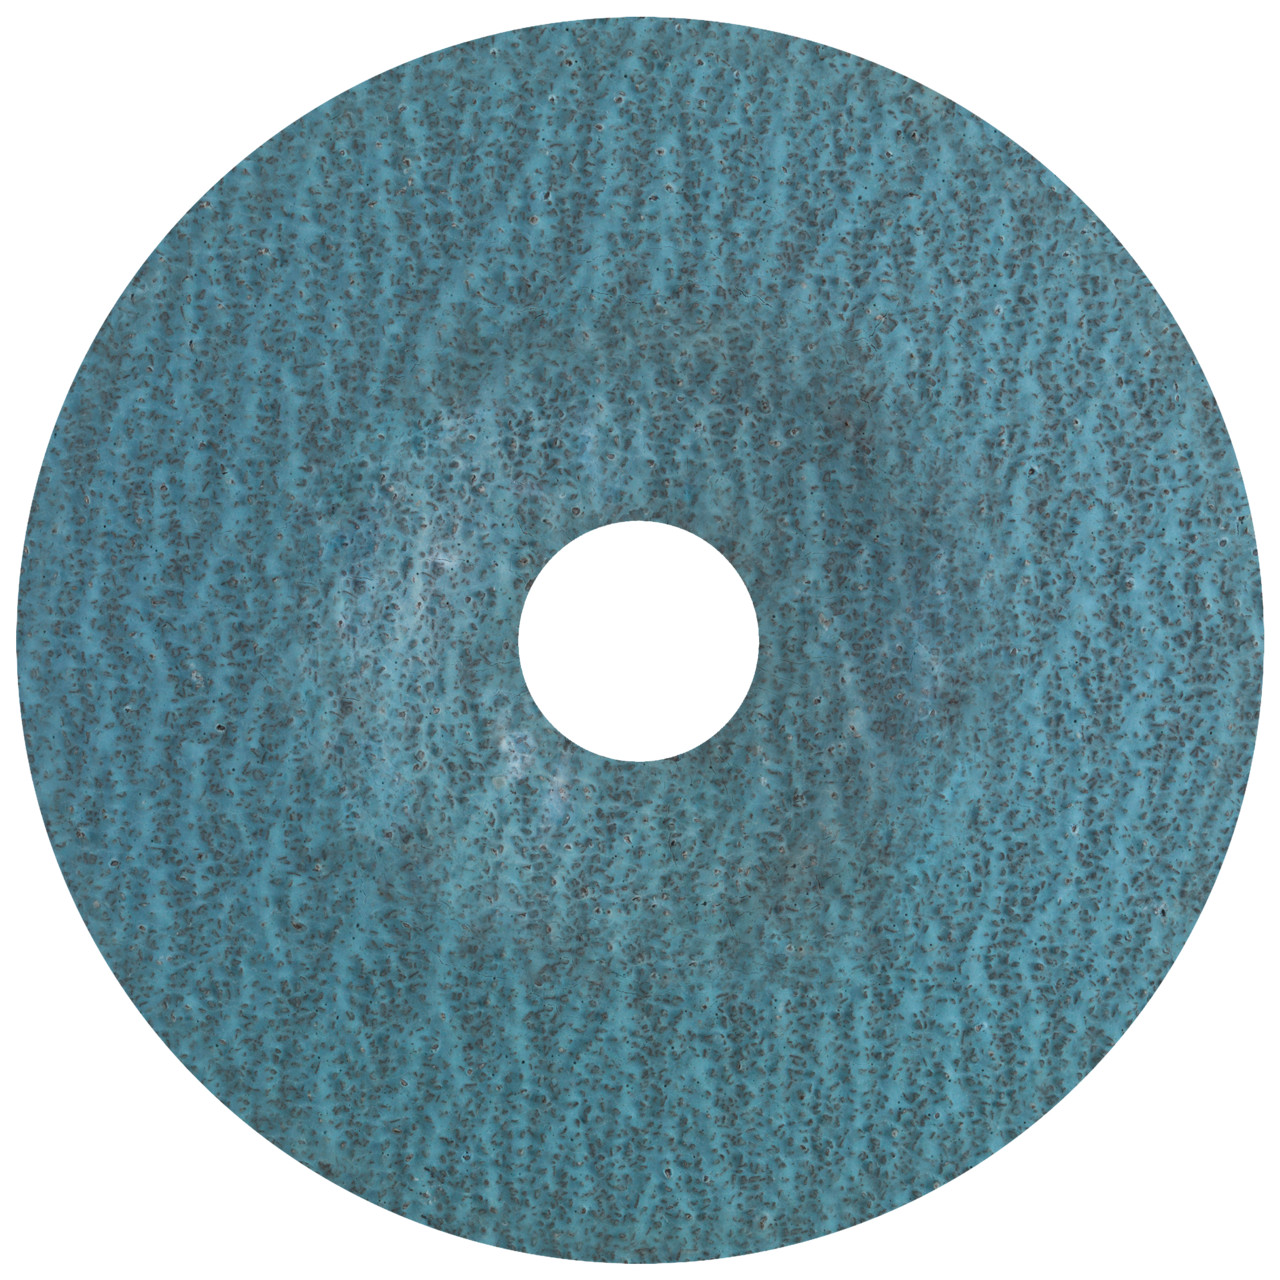 TYROLIT ZA-P48 N NATURAL FIBER DISC DxH 125x22 For steel and stainless steel, P36, form: DISC, Art. 706129